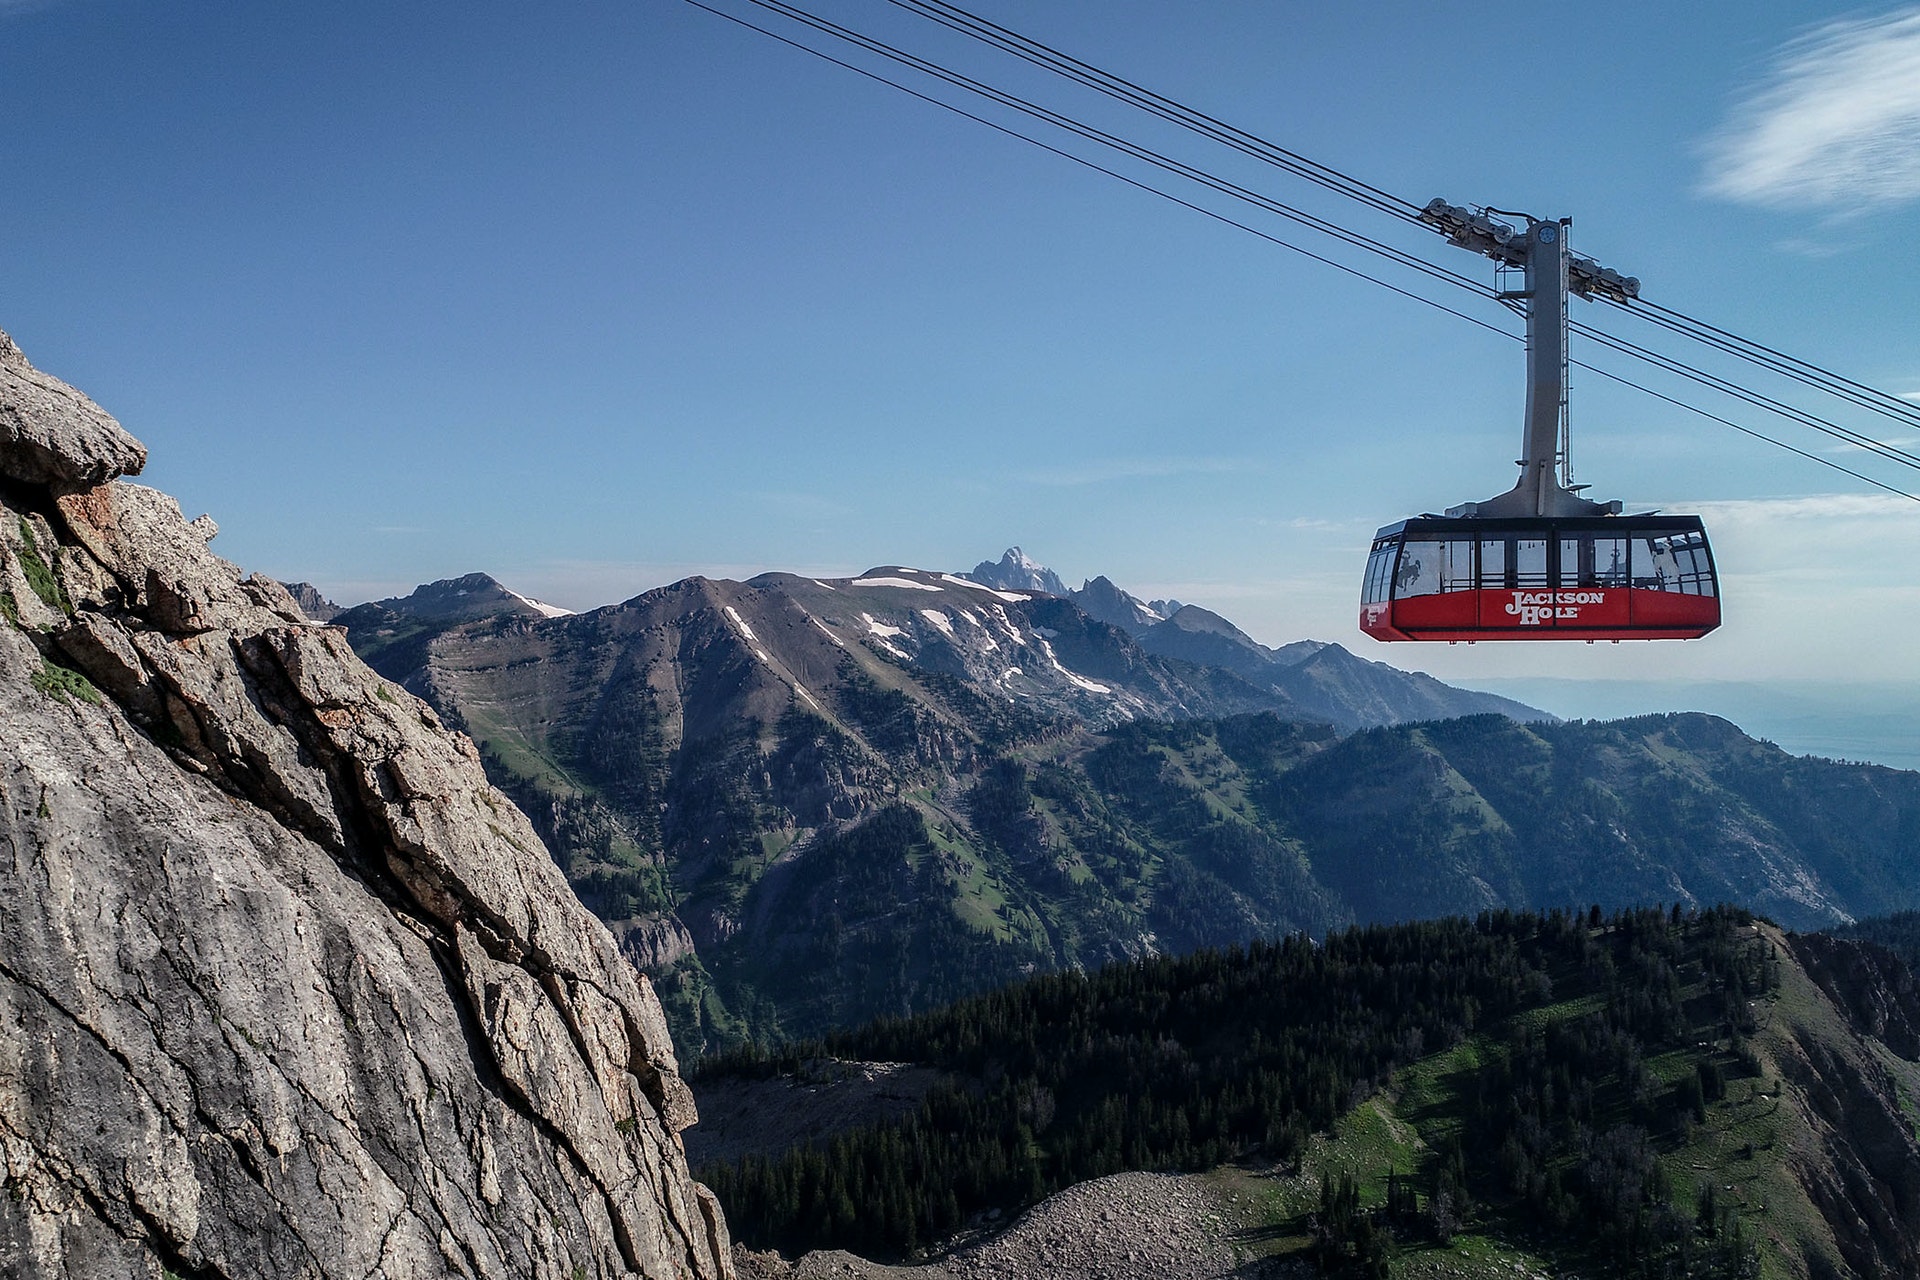 Jackson Hole Mountain Resort tram brings guests up the mountain